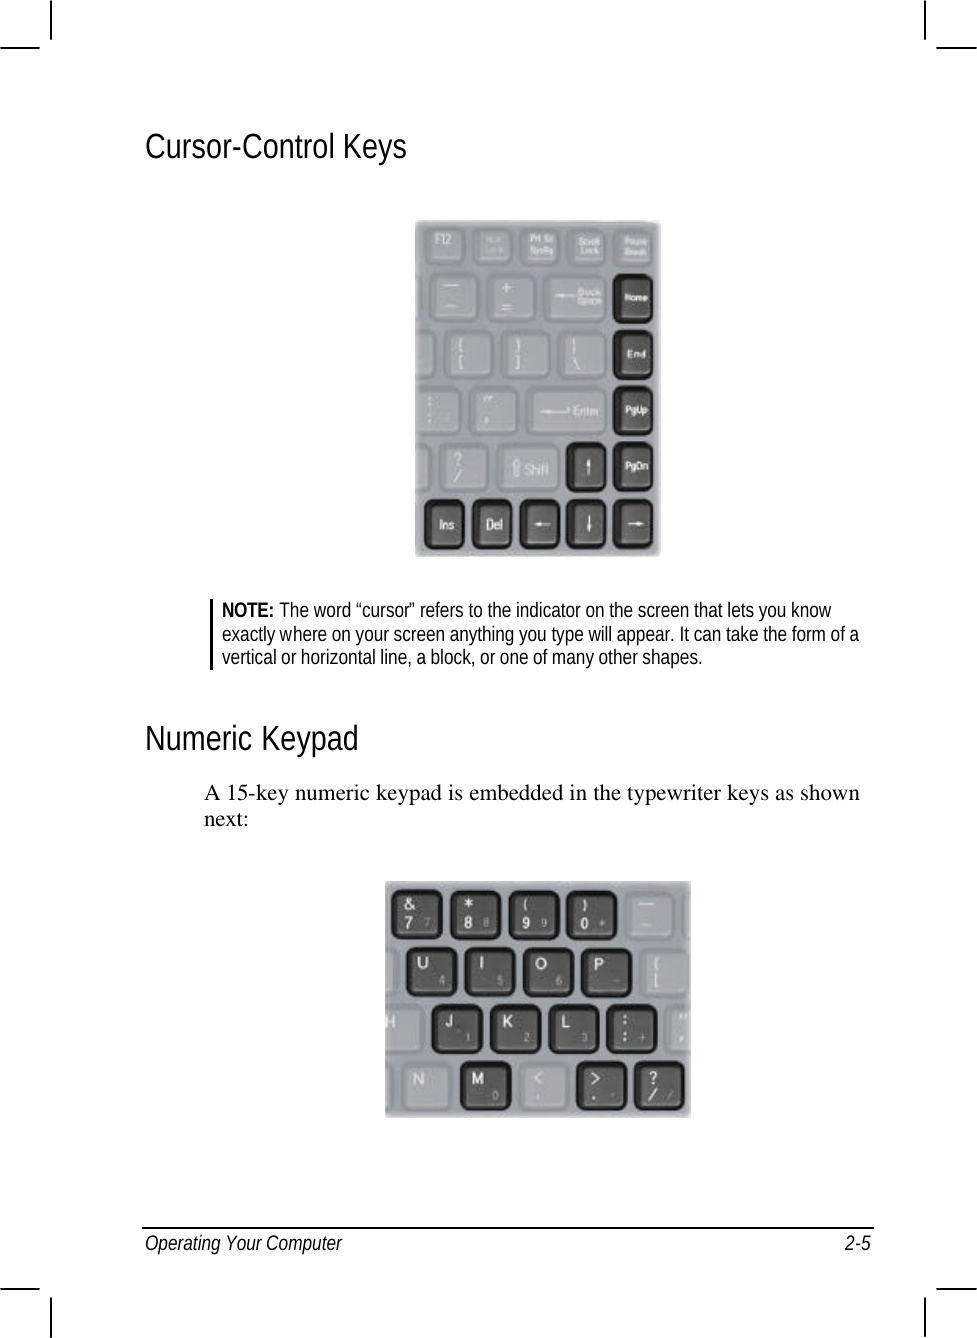  Operating Your Computer 2-5 Cursor-Control Keys  NOTE: The word “cursor” refers to the indicator on the screen that lets you know exactly where on your screen anything you type will appear. It can take the form of a vertical or horizontal line, a block, or one of many other shapes.  Numeric Keypad A 15-key numeric keypad is embedded in the typewriter keys as shown next:  